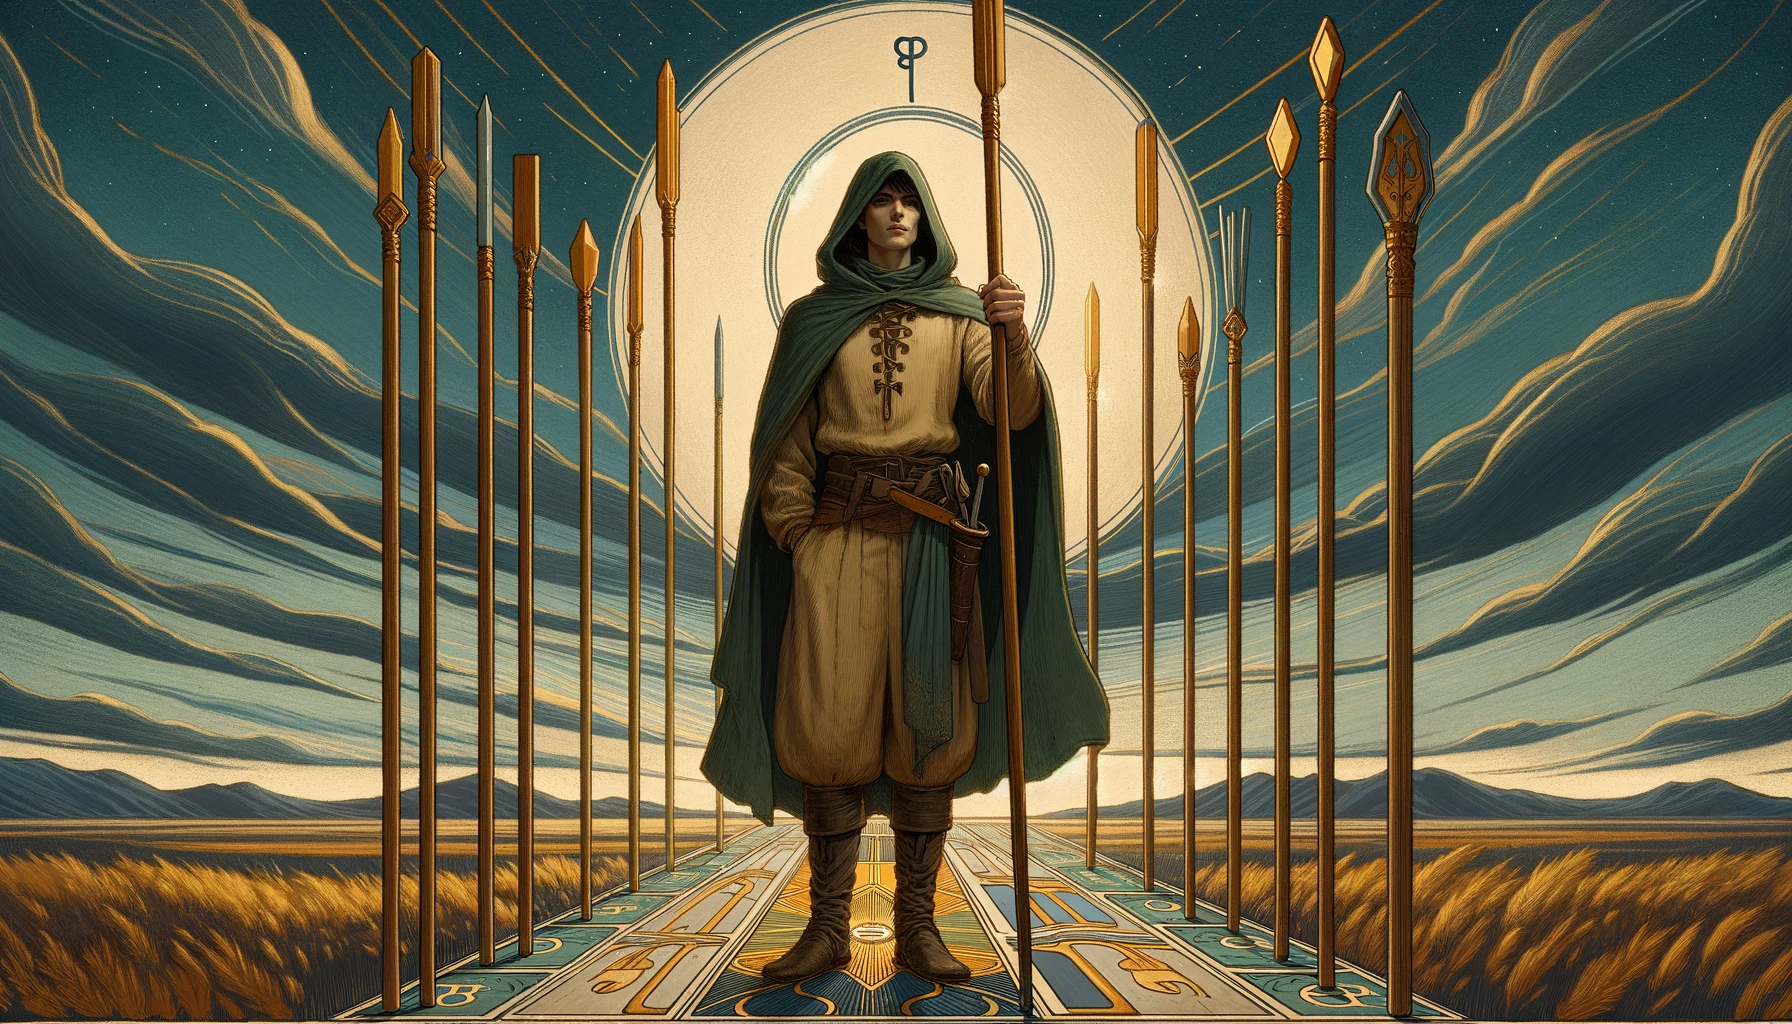 The image portrays an individual embodying resilience, vigilance, and readiness to face any challenge. Against a backdrop symbolizing the ongoing journey and the need for protection and perseverance, the figure's determination and strength are evident. The visual representation enriches the article by capturing the spirit of defiance and resolve that defines the Nine of Wands personality, emphasizing the individual's unwavering commitment to overcoming obstacles and continuing forward.